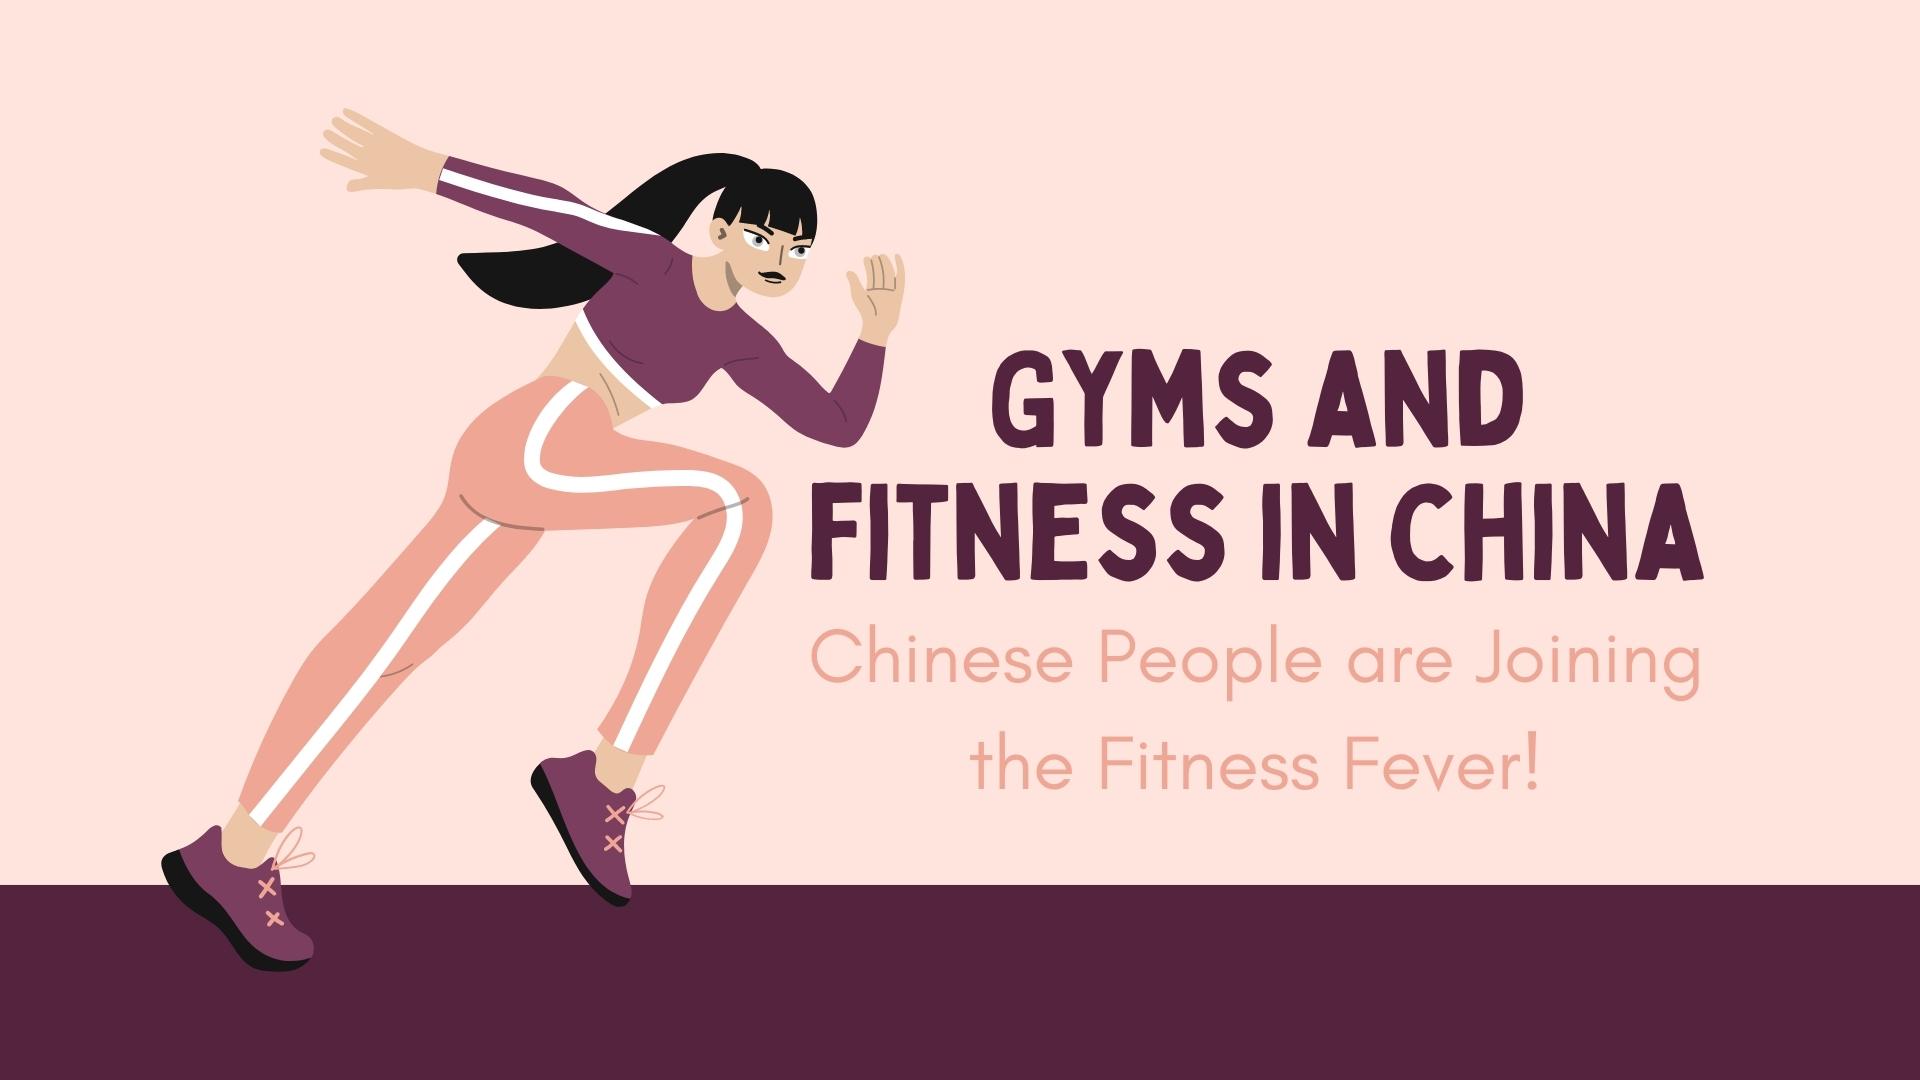 Gyms and fitness in china